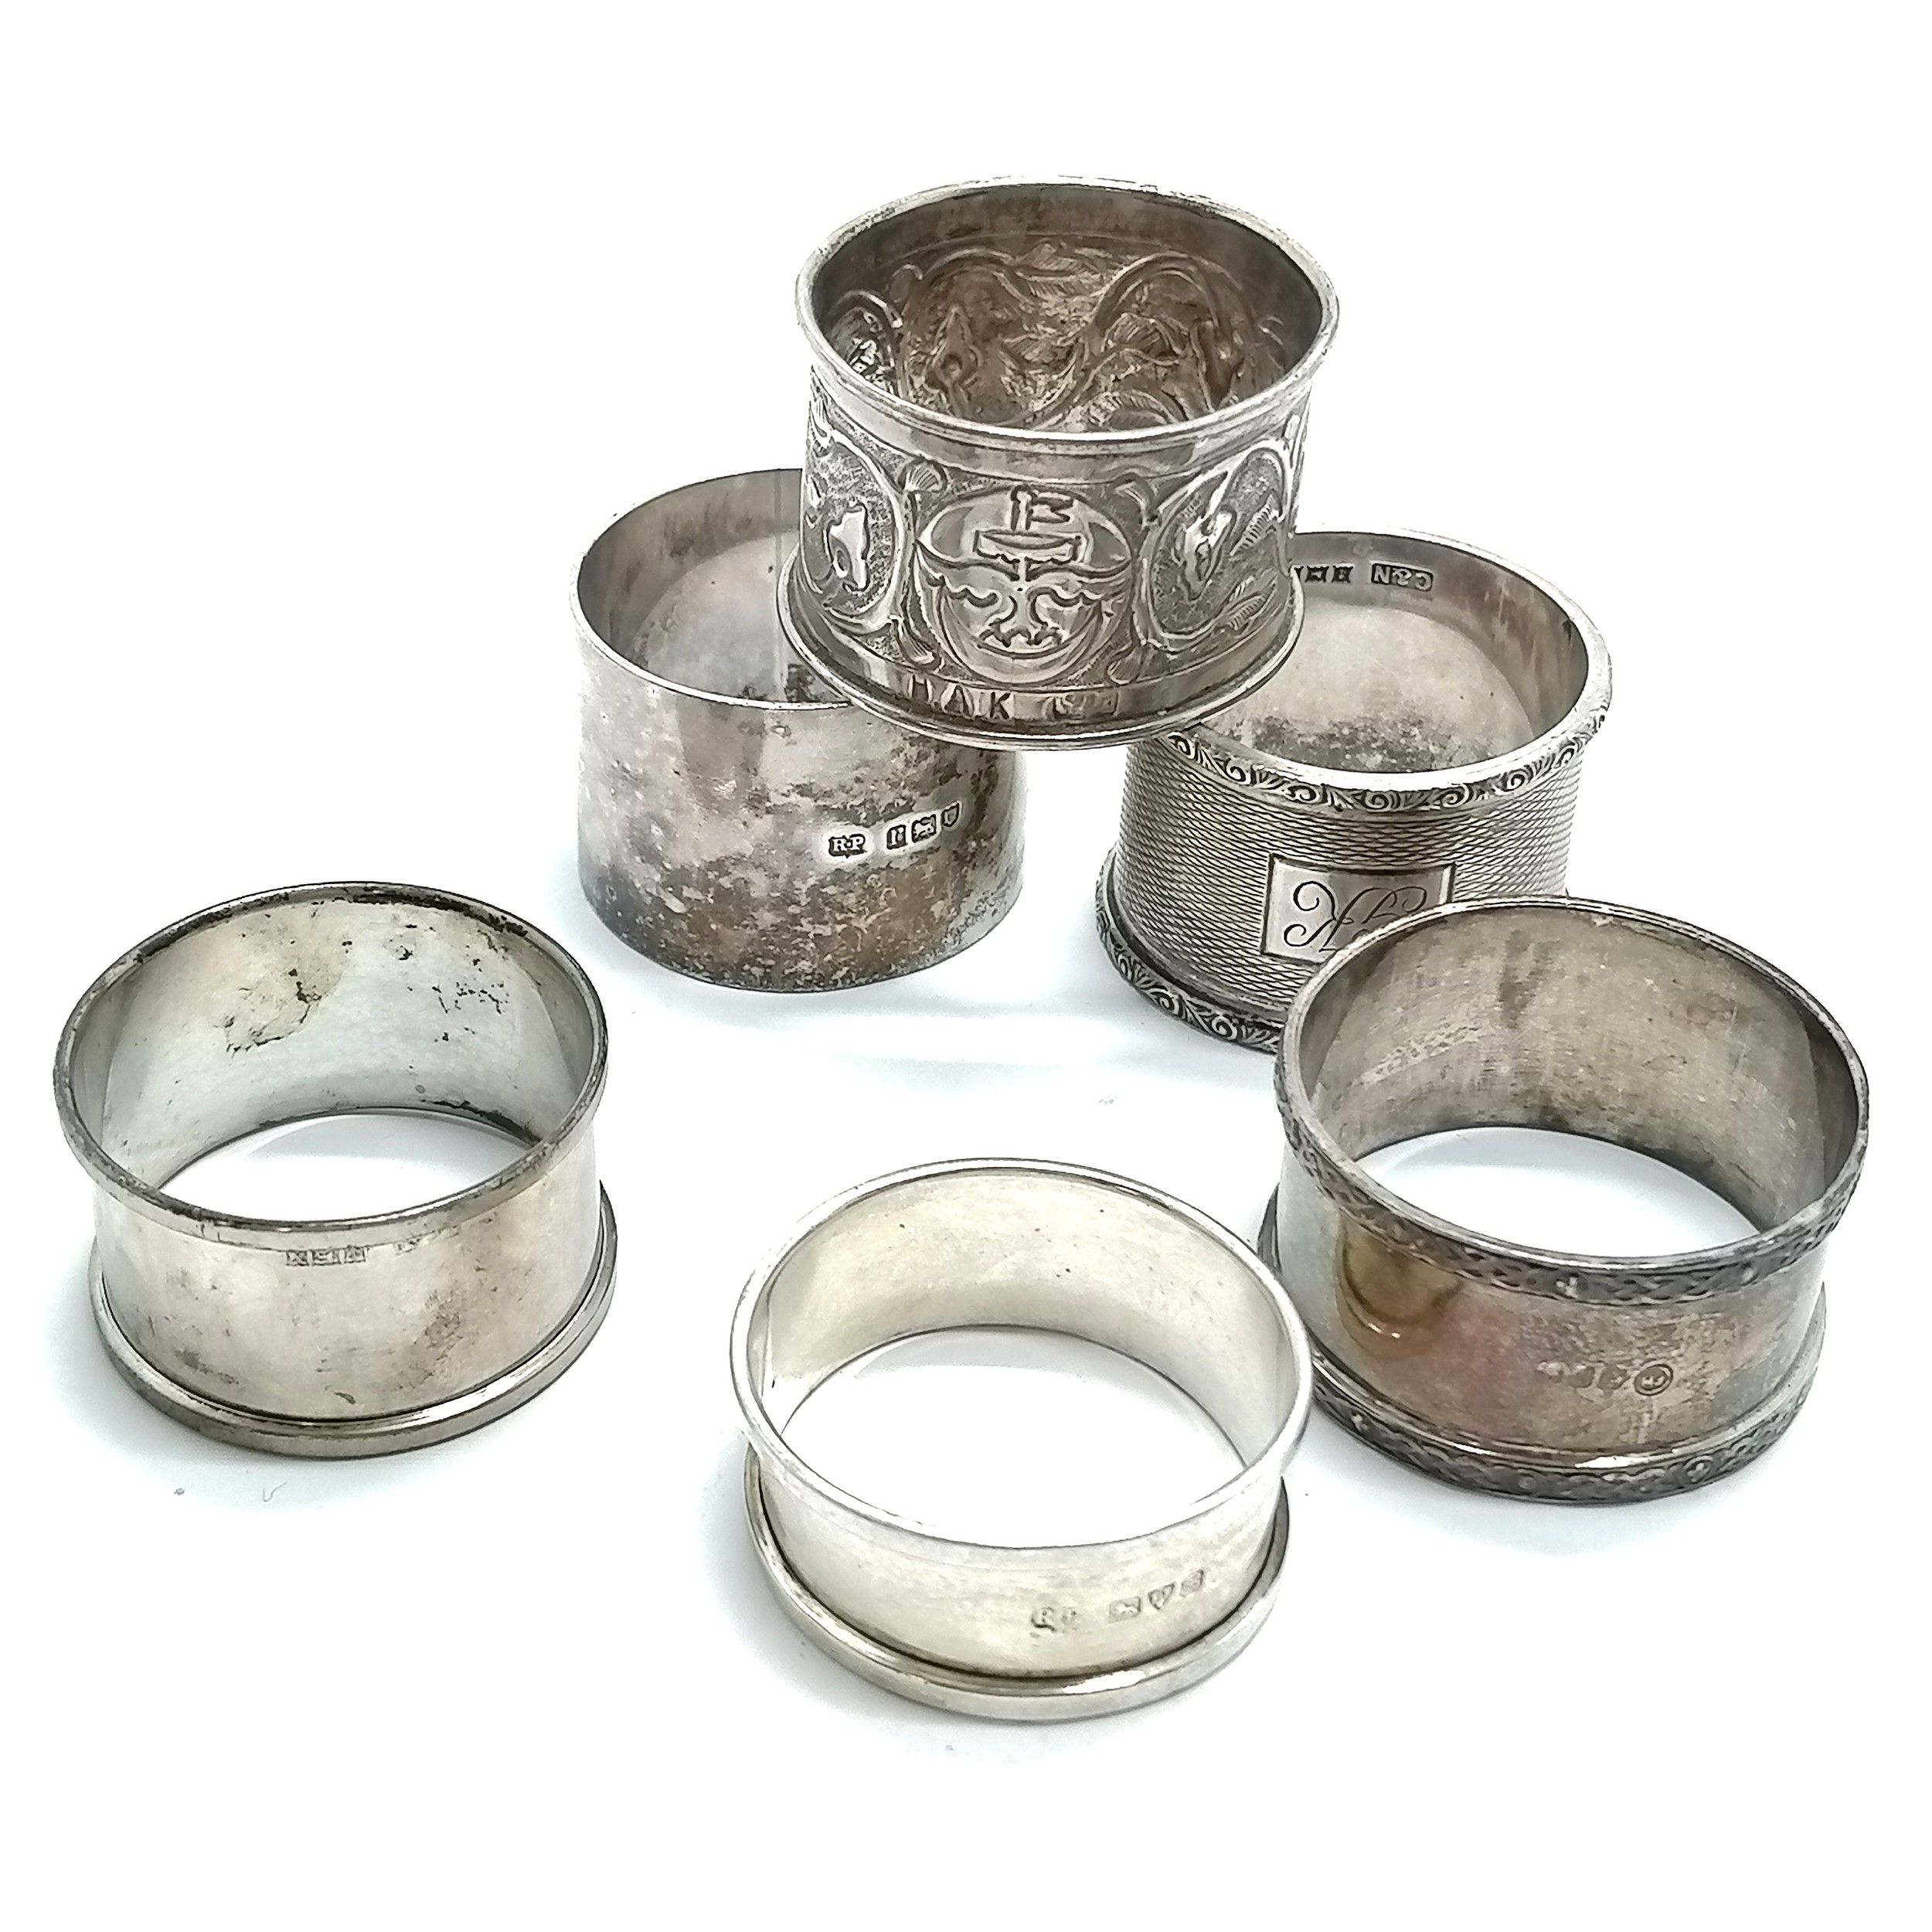 6 x silver napkin rings inc 1 unmarked 'foreign' & 1 by Francis Howard Ltd (Edinburgh) etc - total - Image 2 of 2